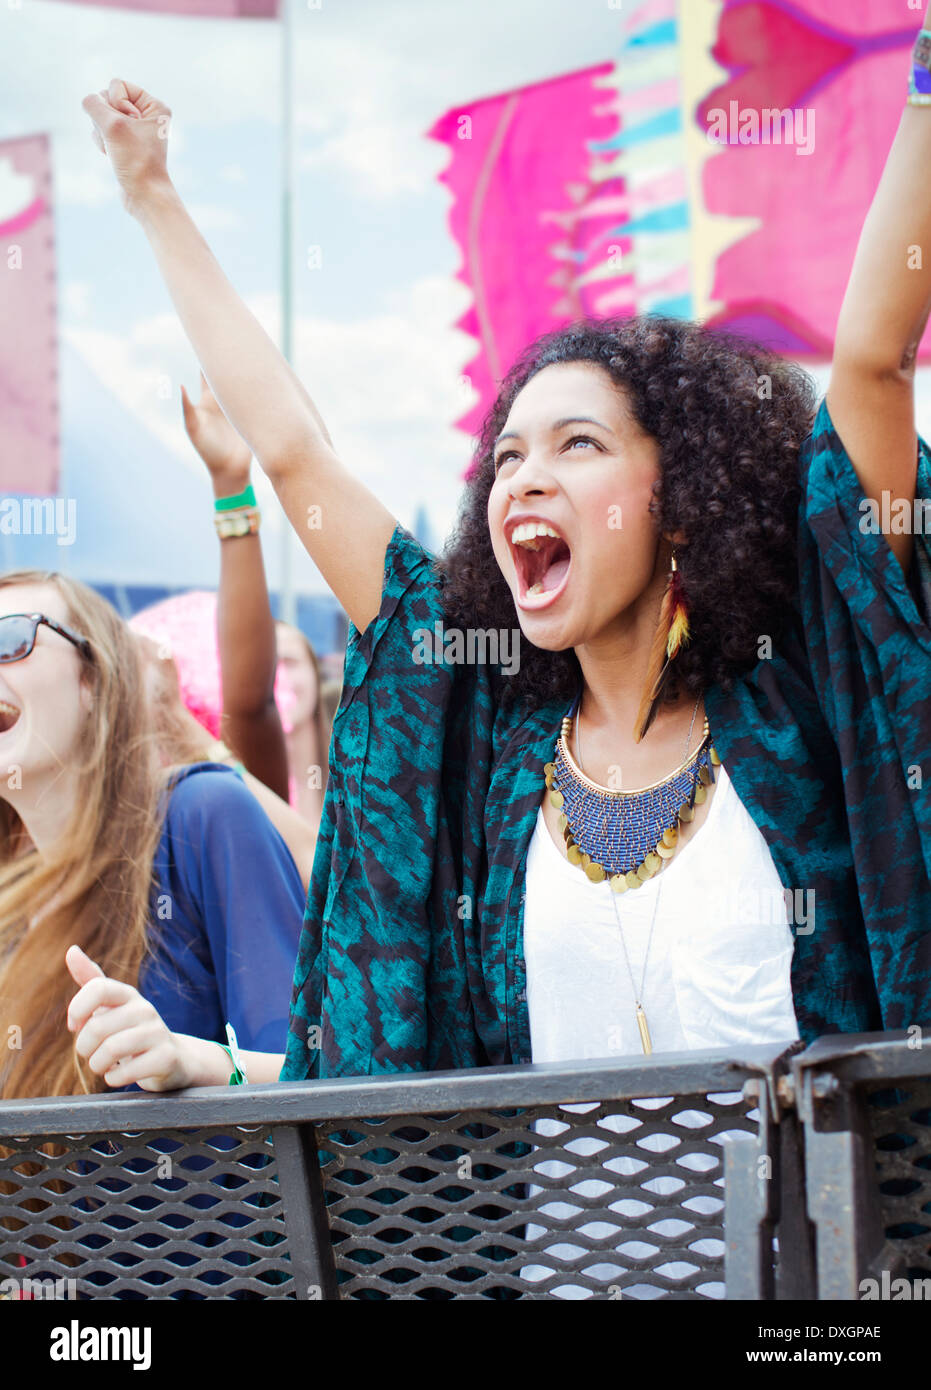 Woman cheering at music festival Stock Photo